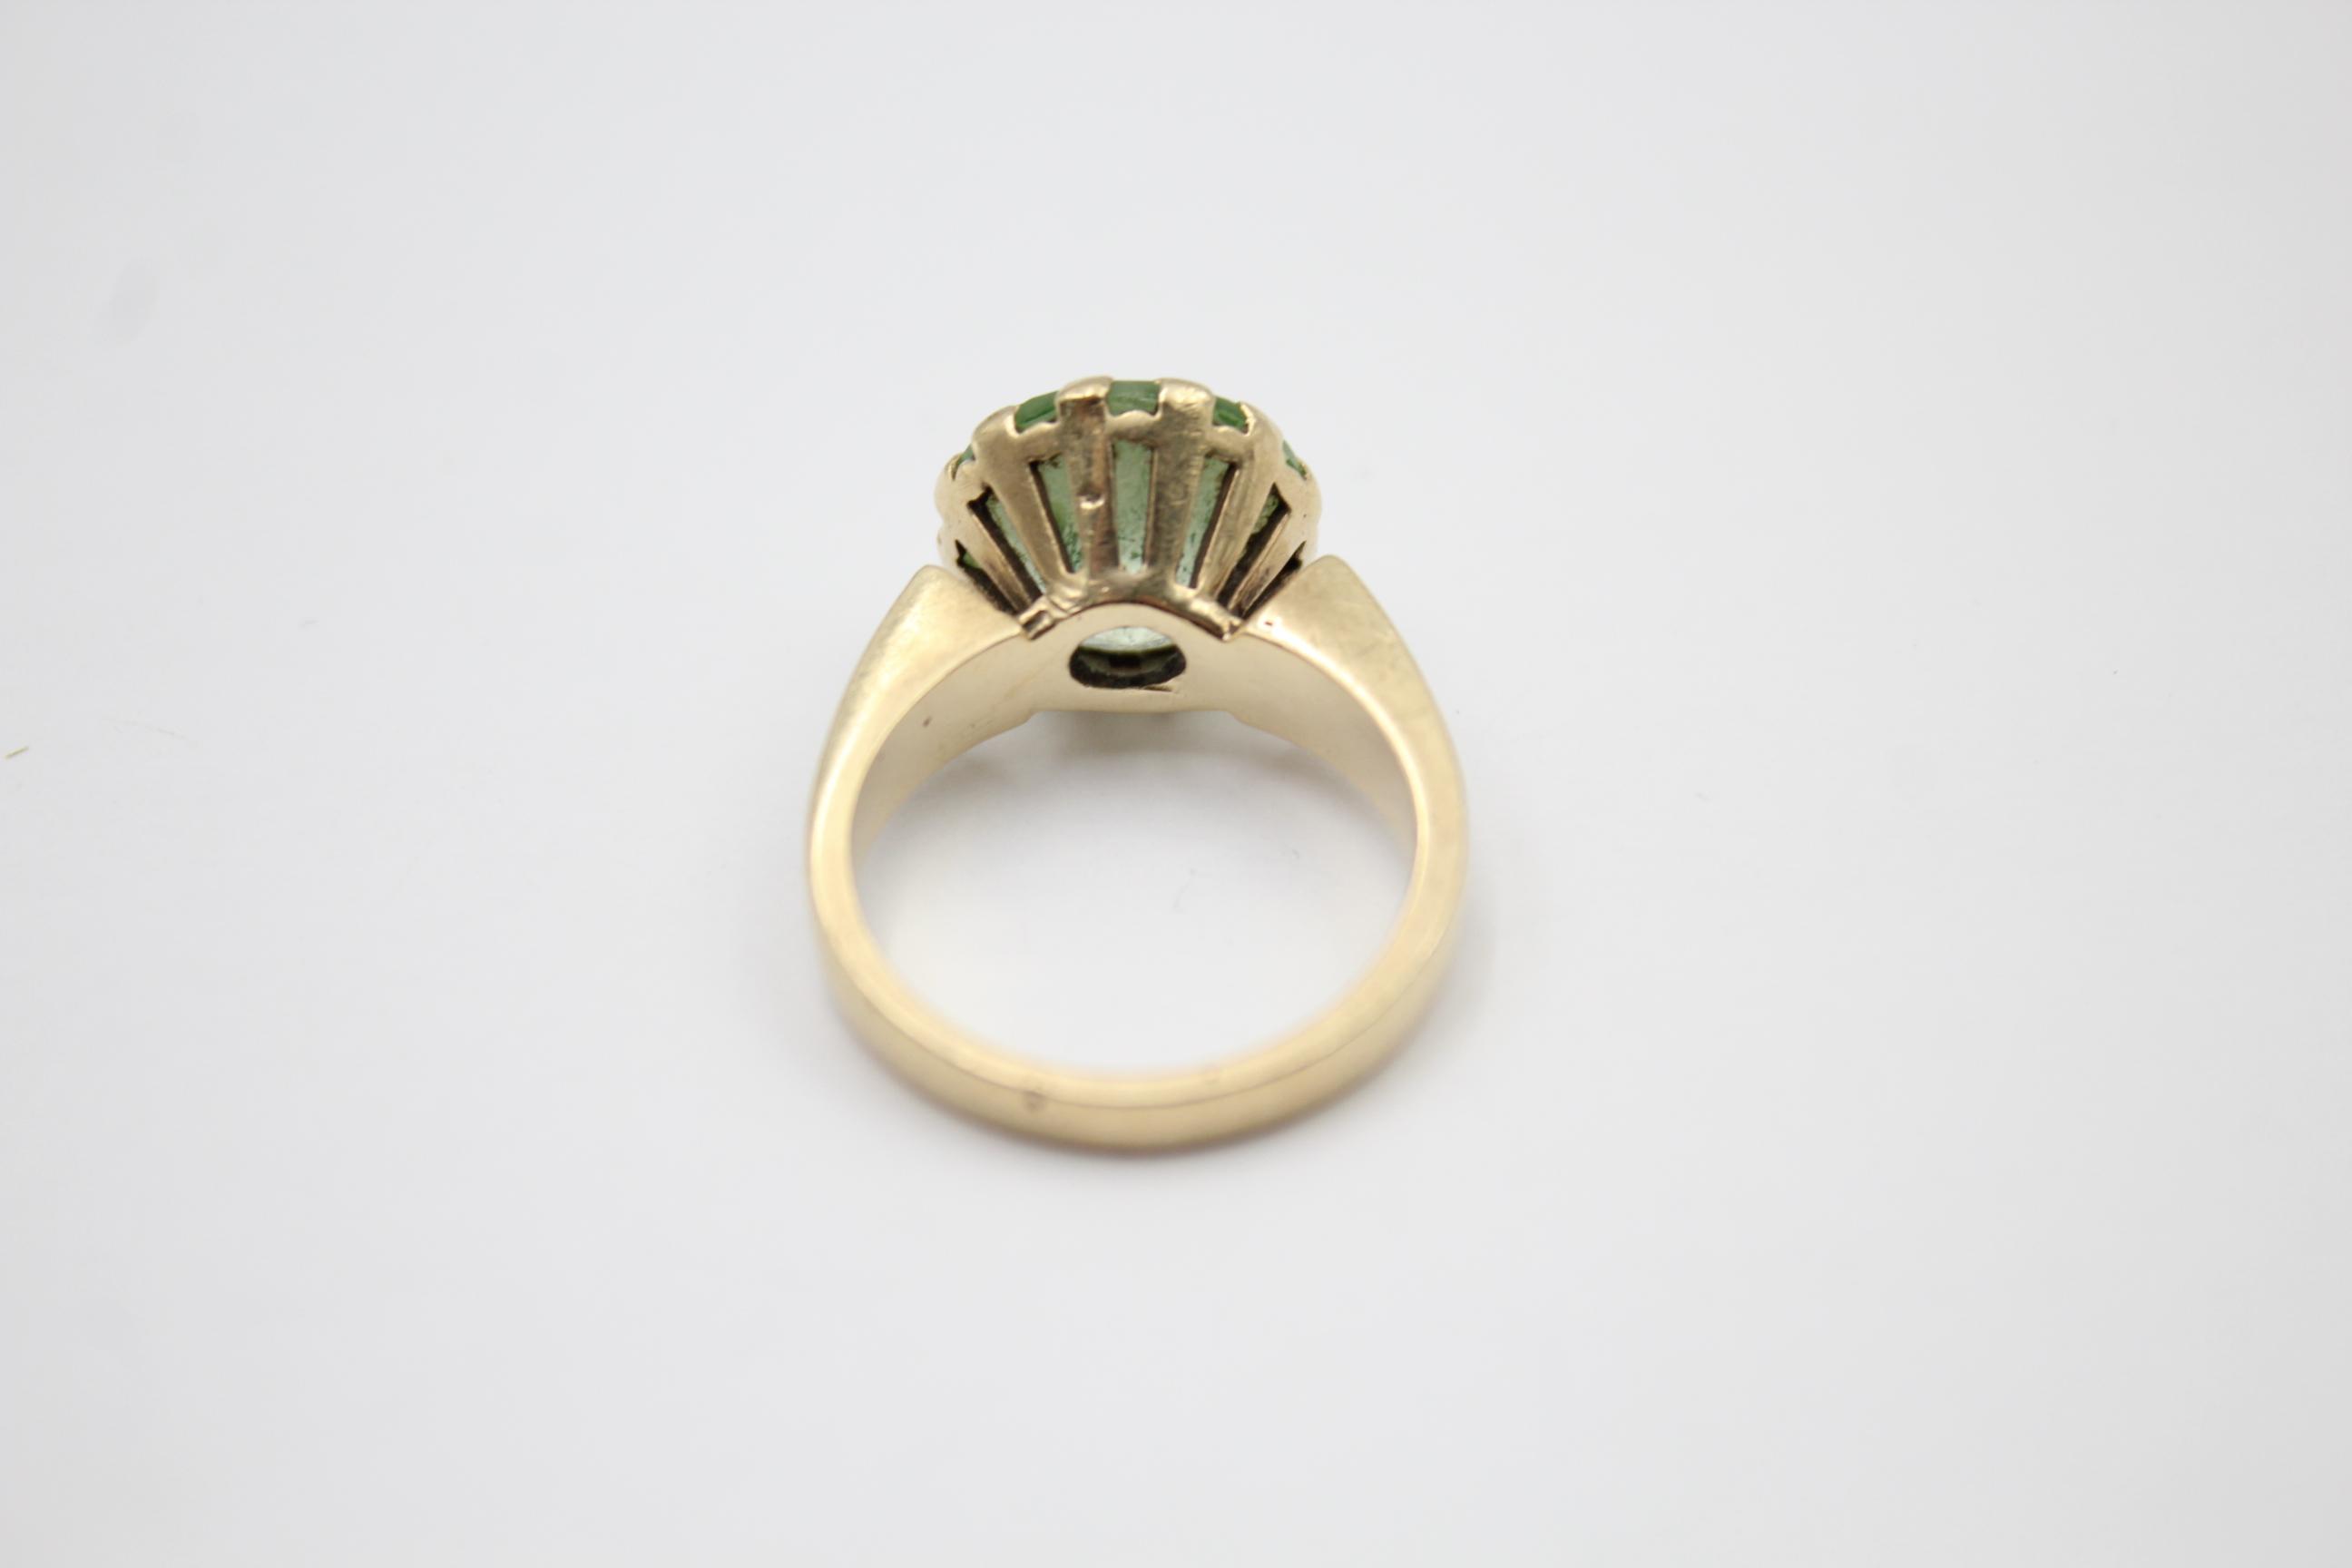 9ct gold synthetic spinel cocktail ring (5.4g) - Image 3 of 4